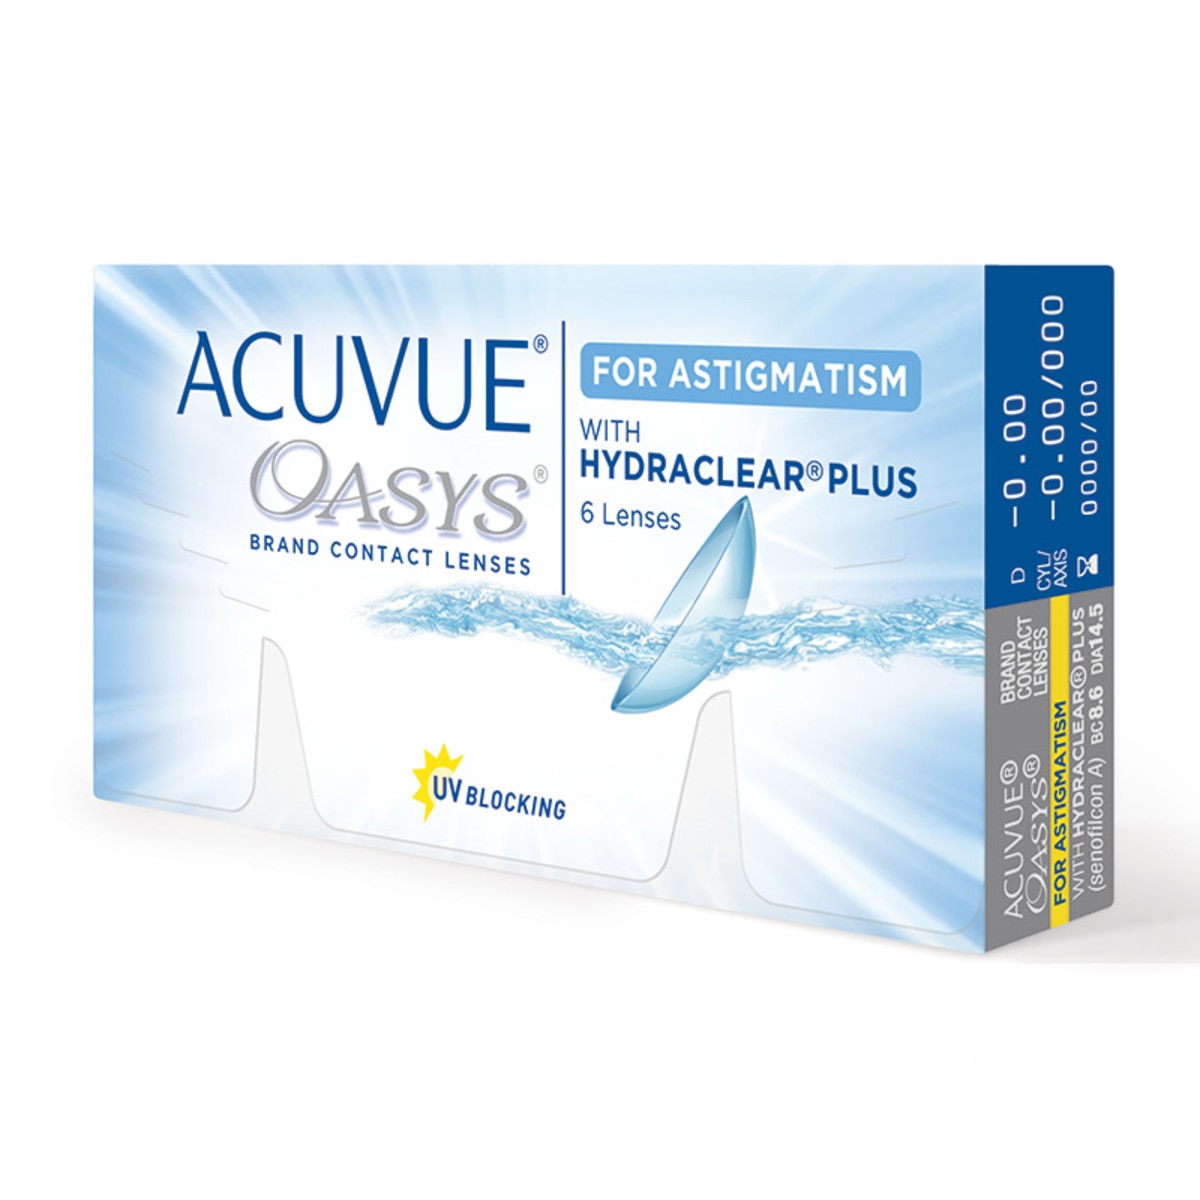 ACUVUE OASYS® con HYDRACLEAR Plus® para Astigmatismo (D -3.25, Cyl/Axis -1.75/40)